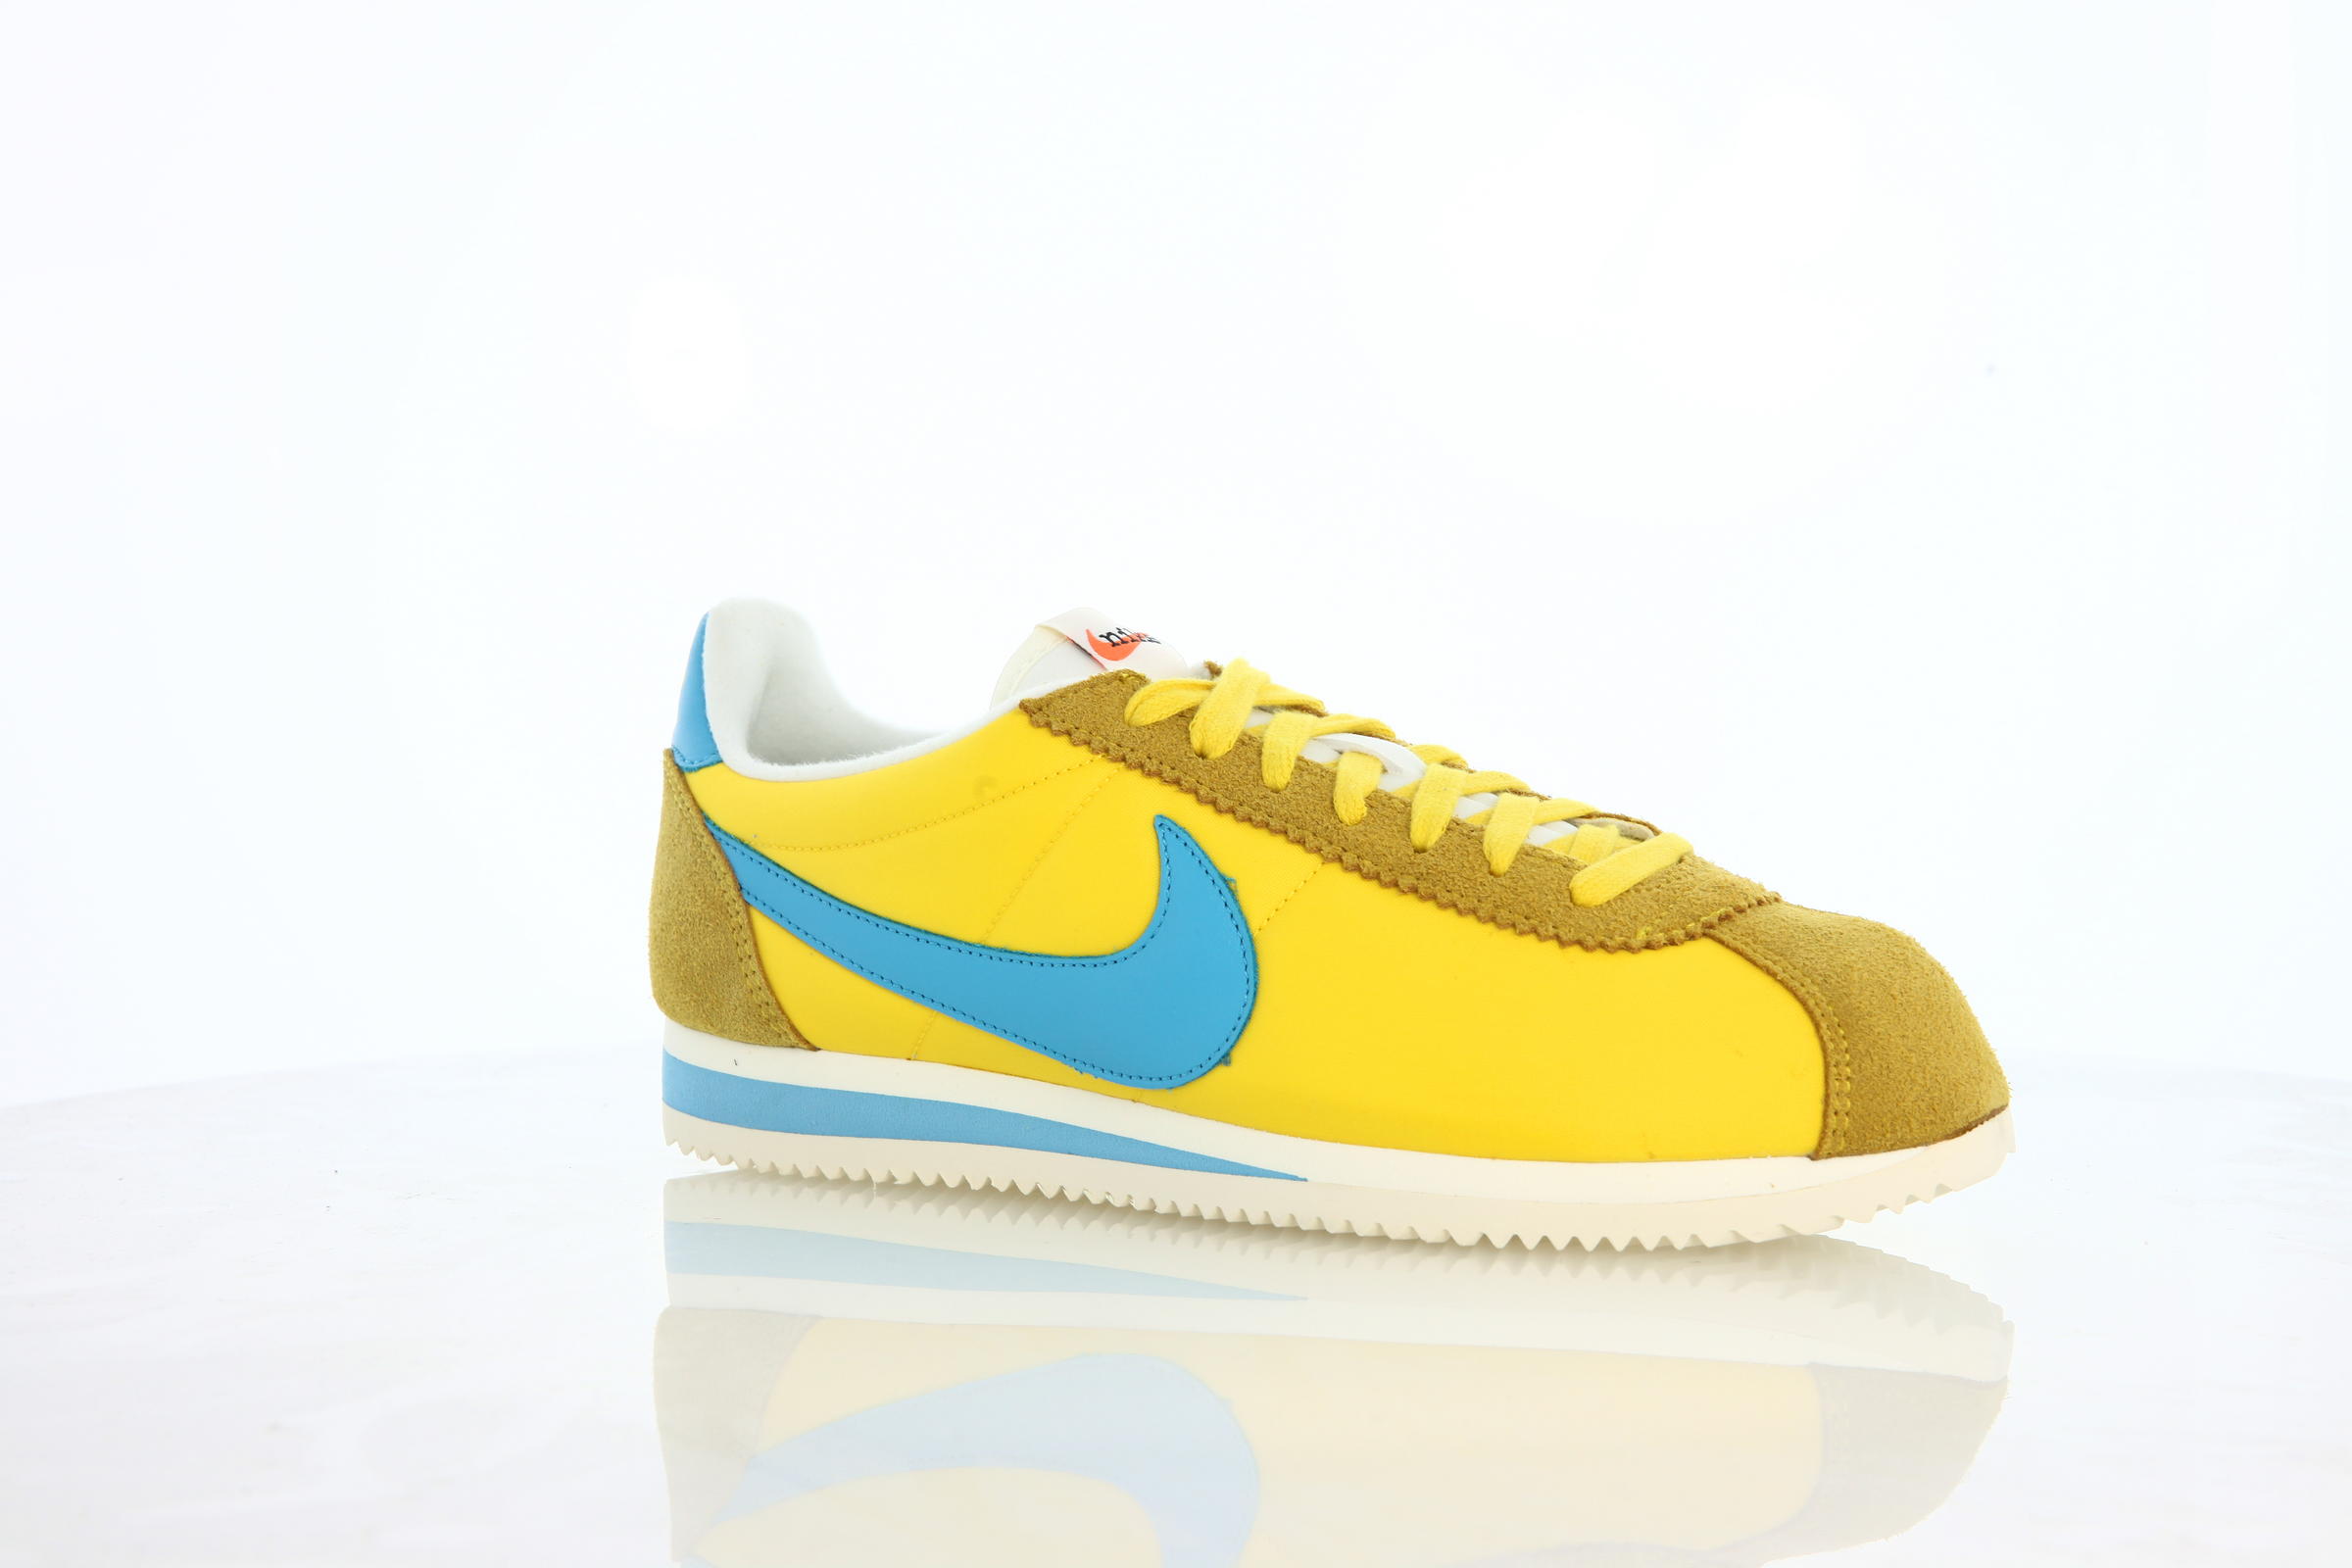 Nike Classic Cortez Nylon KM QS "Kenny Moore Collection"